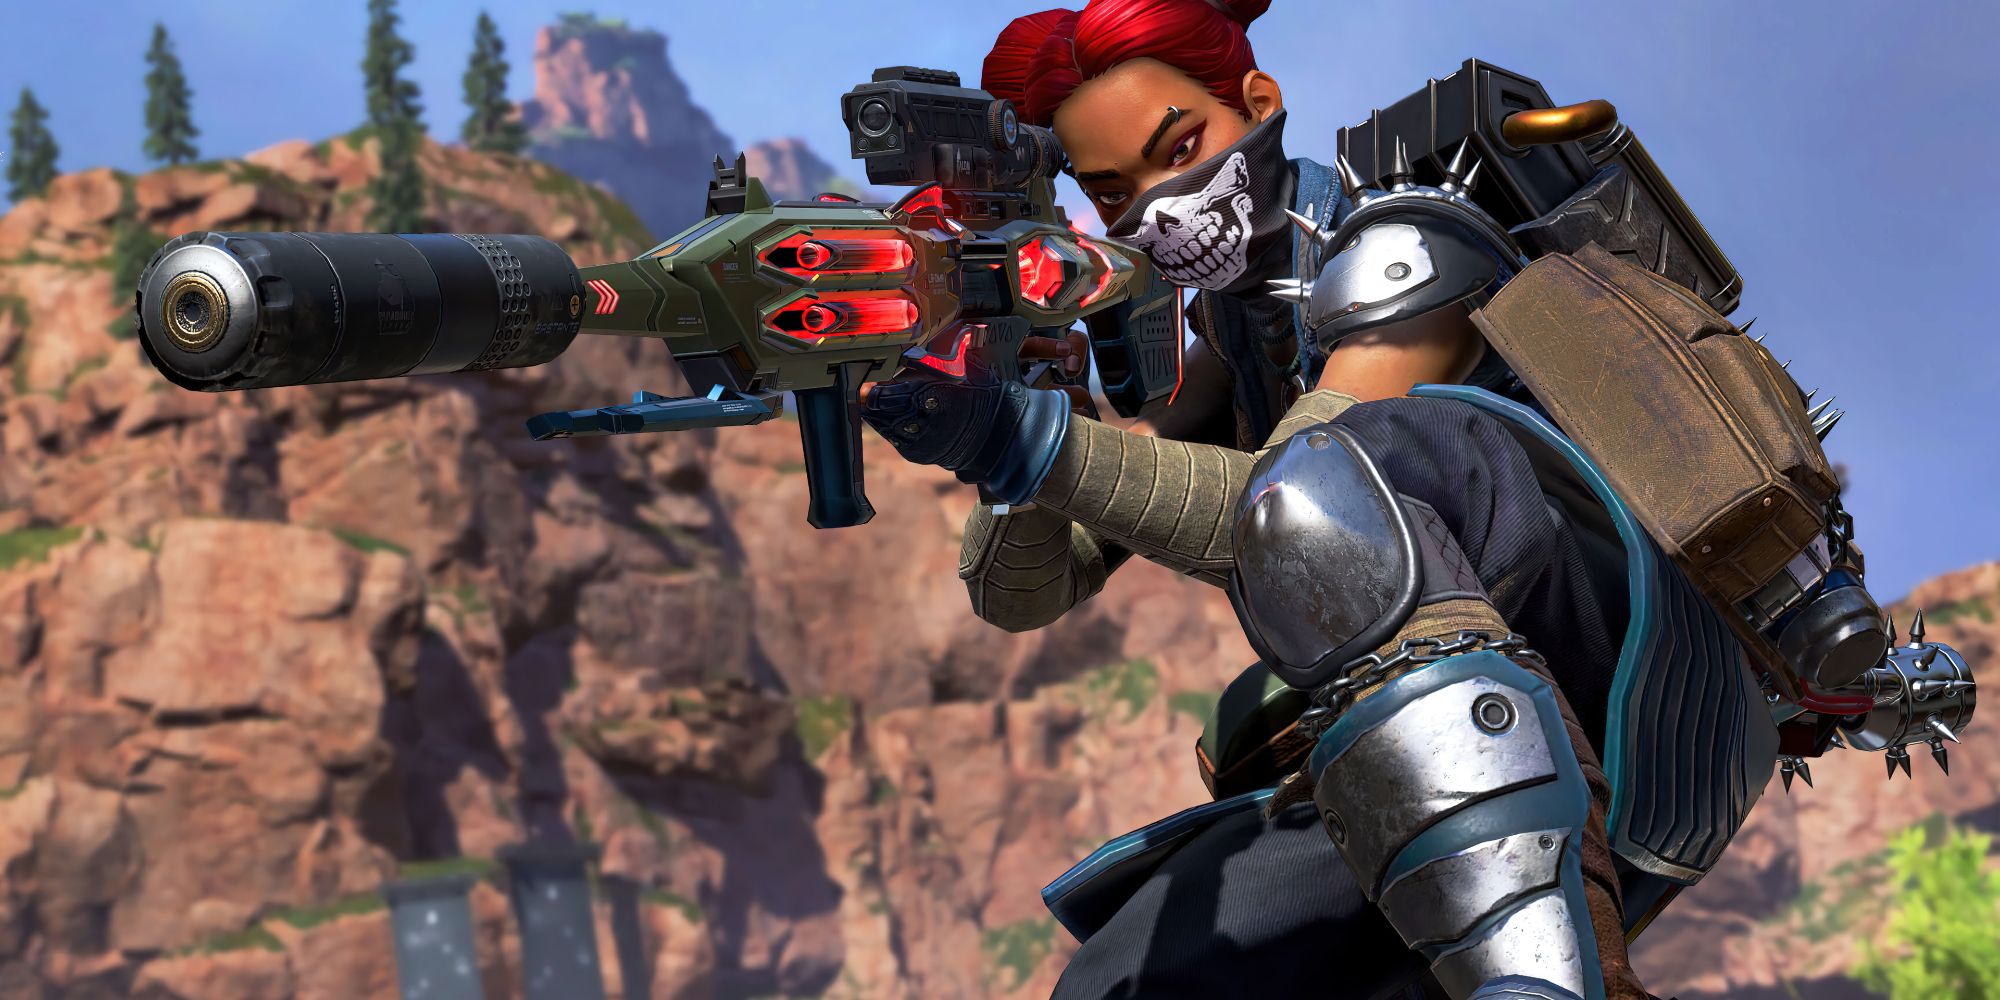 An image of Lifeline's Bad To The Bone skin from Apex Legends